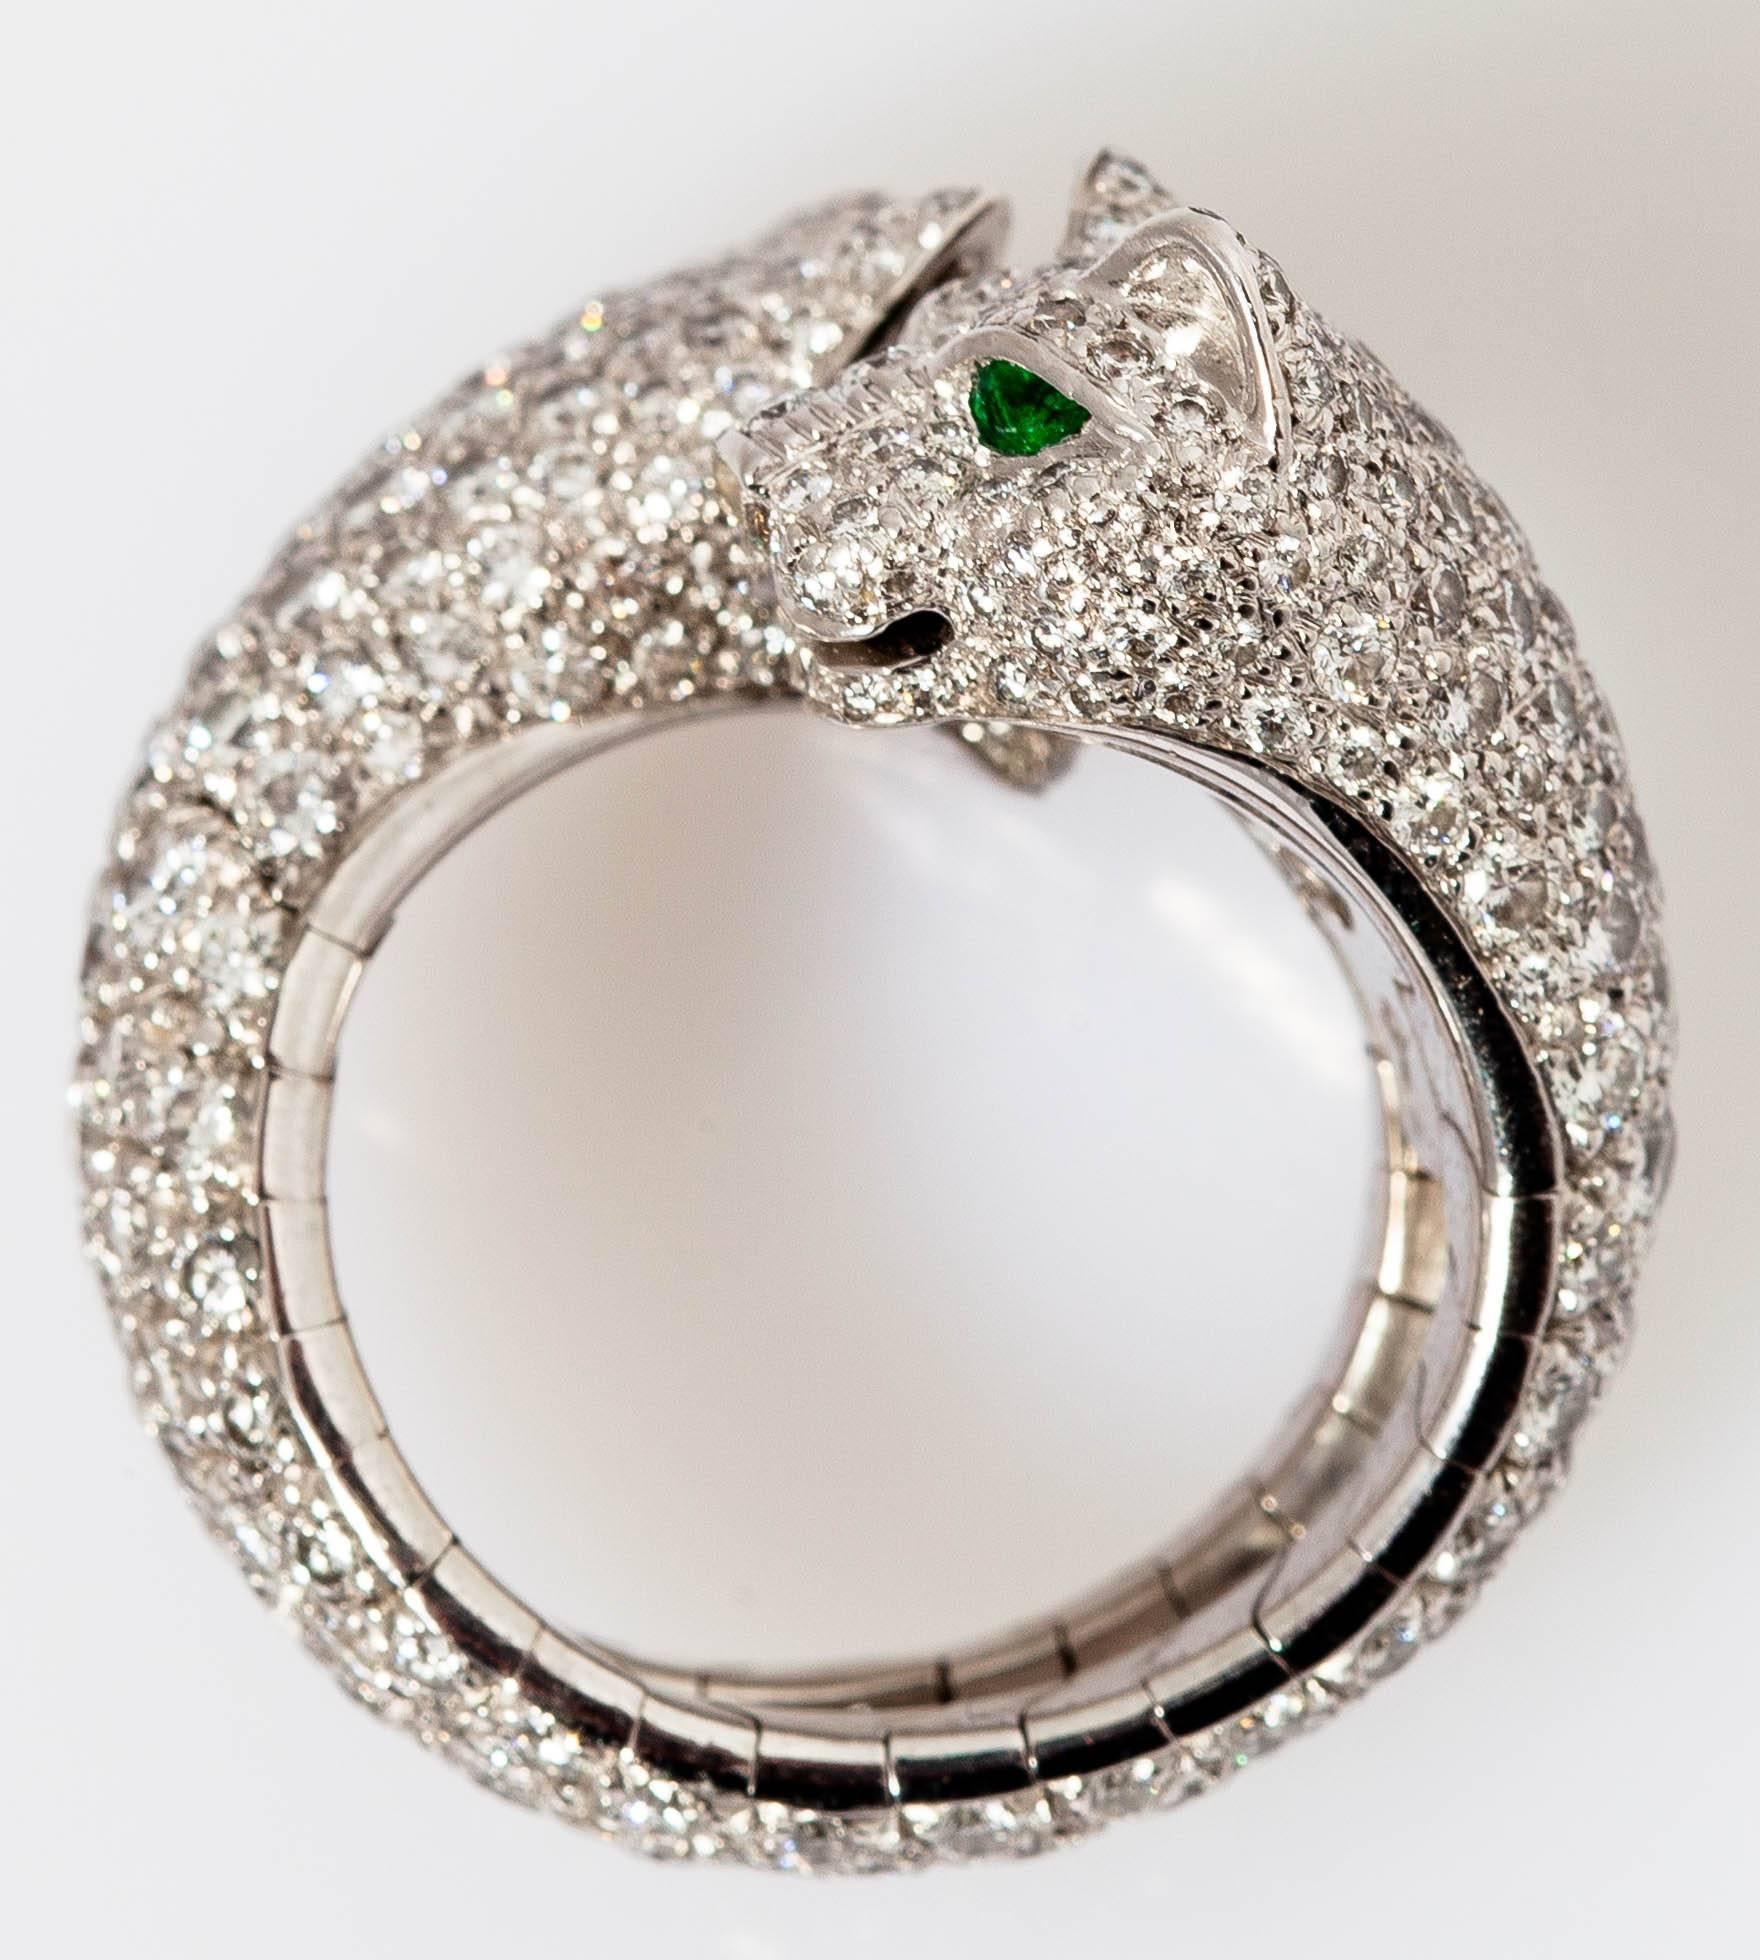 Beautiful ring designed as a 18k white gold, accented by 4 emerald eyes and pave brilliant diamonds. Rare piece, part of Cartier's 